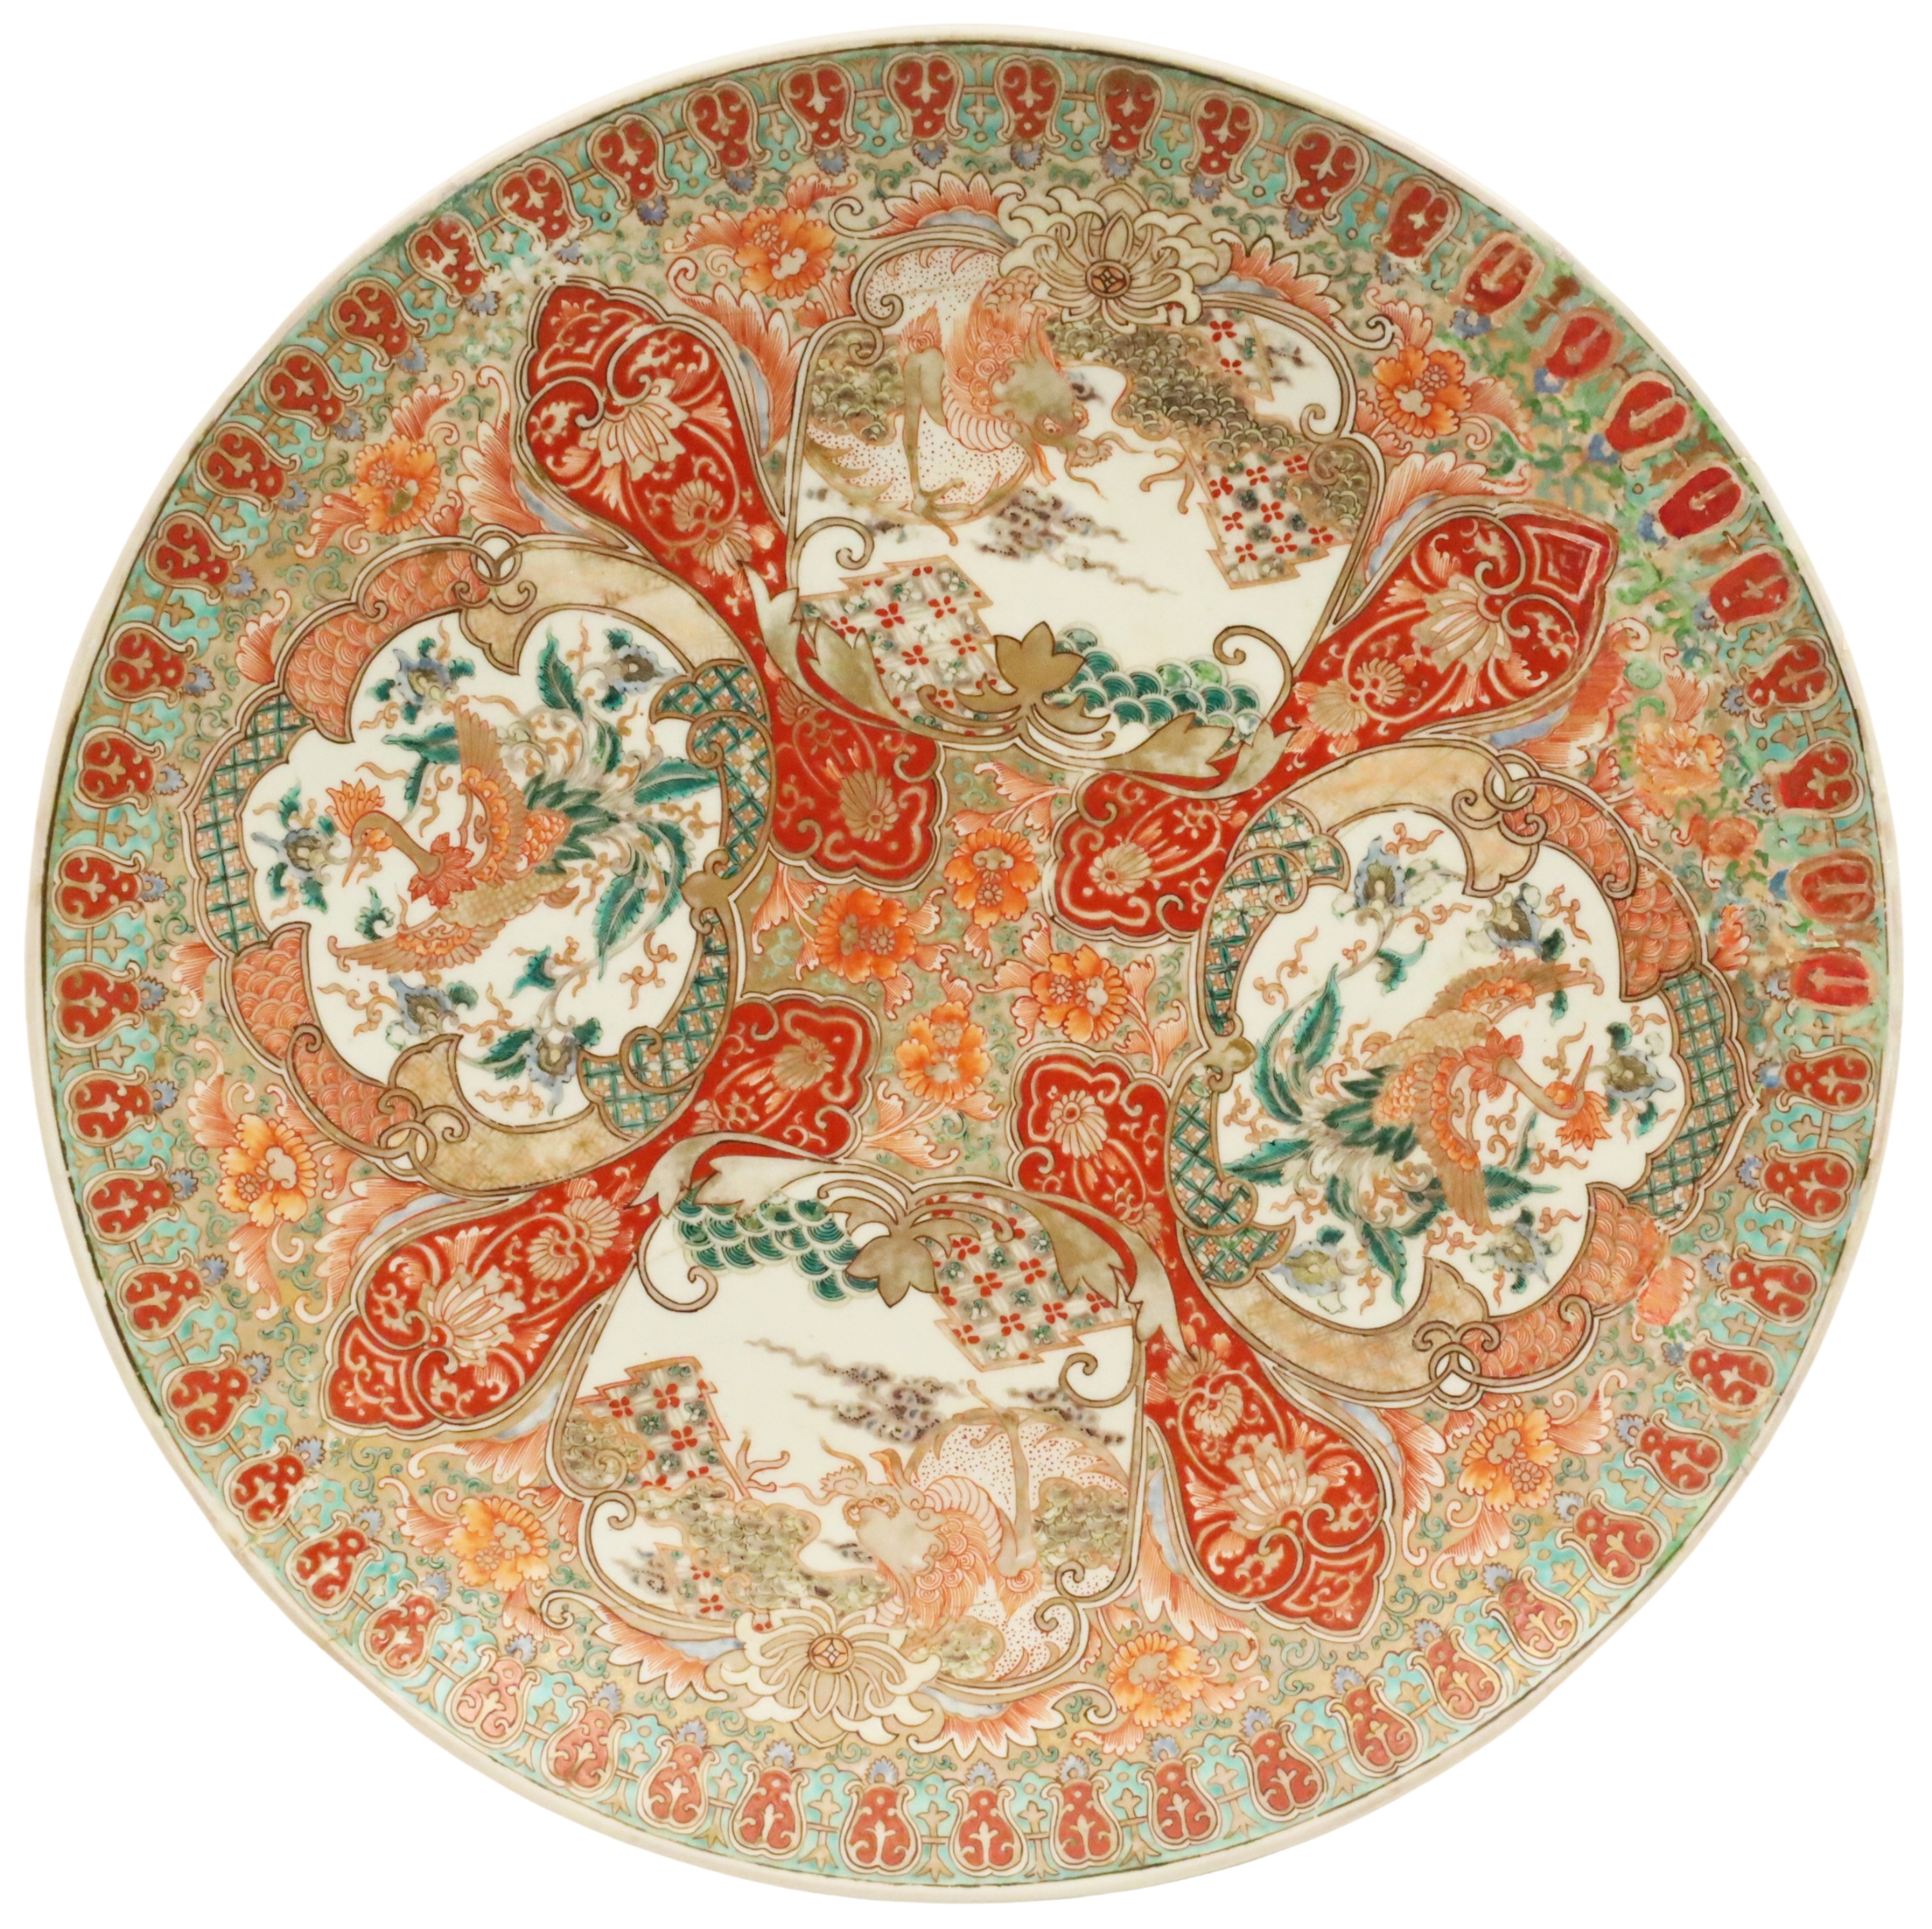 LARGE CHINESE PORCELAIN CHARGER 2f8e98